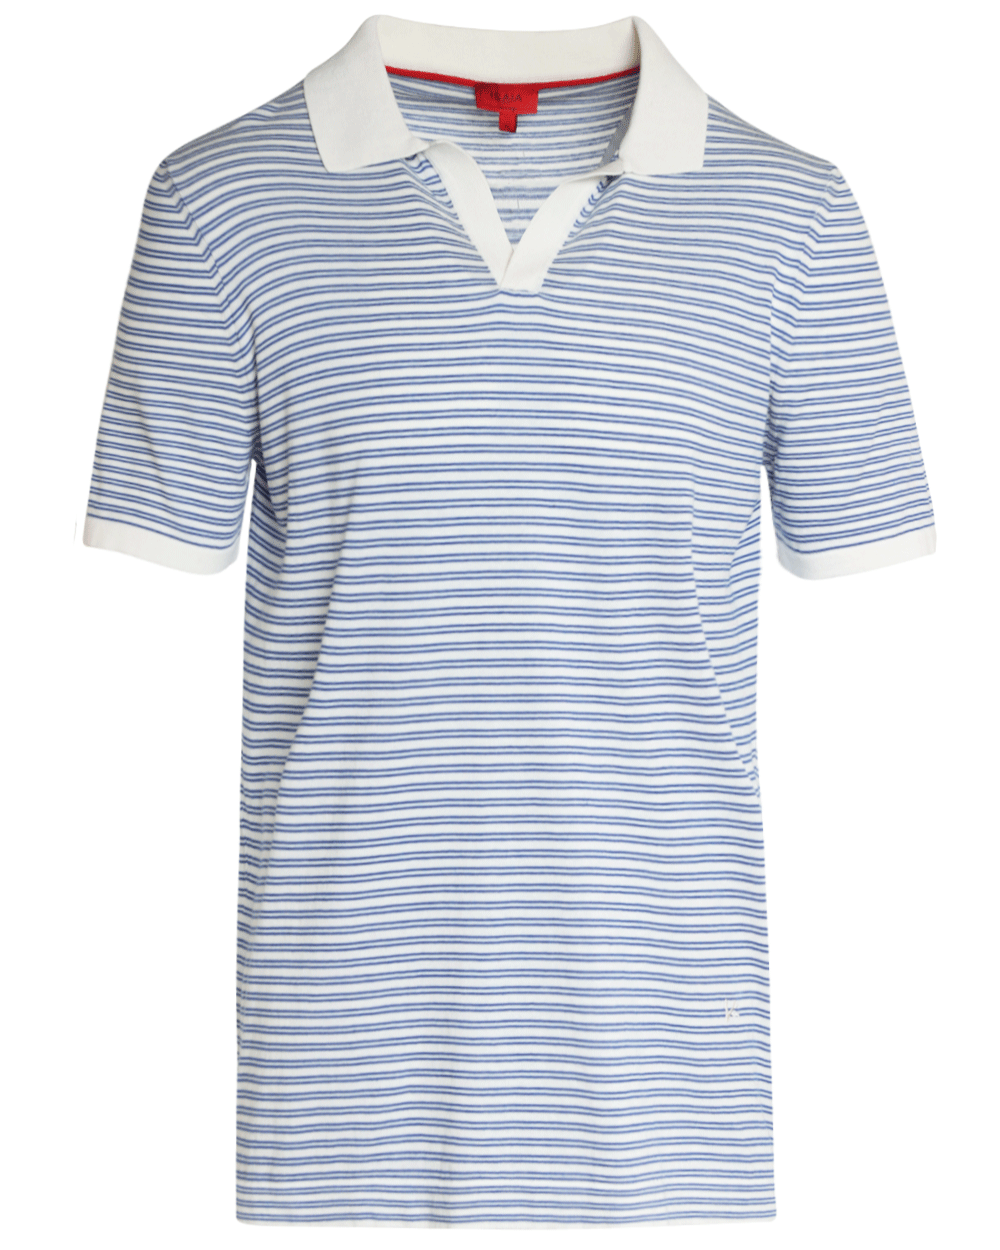 Blue and White Striped Cotton Short Sleeve Polo